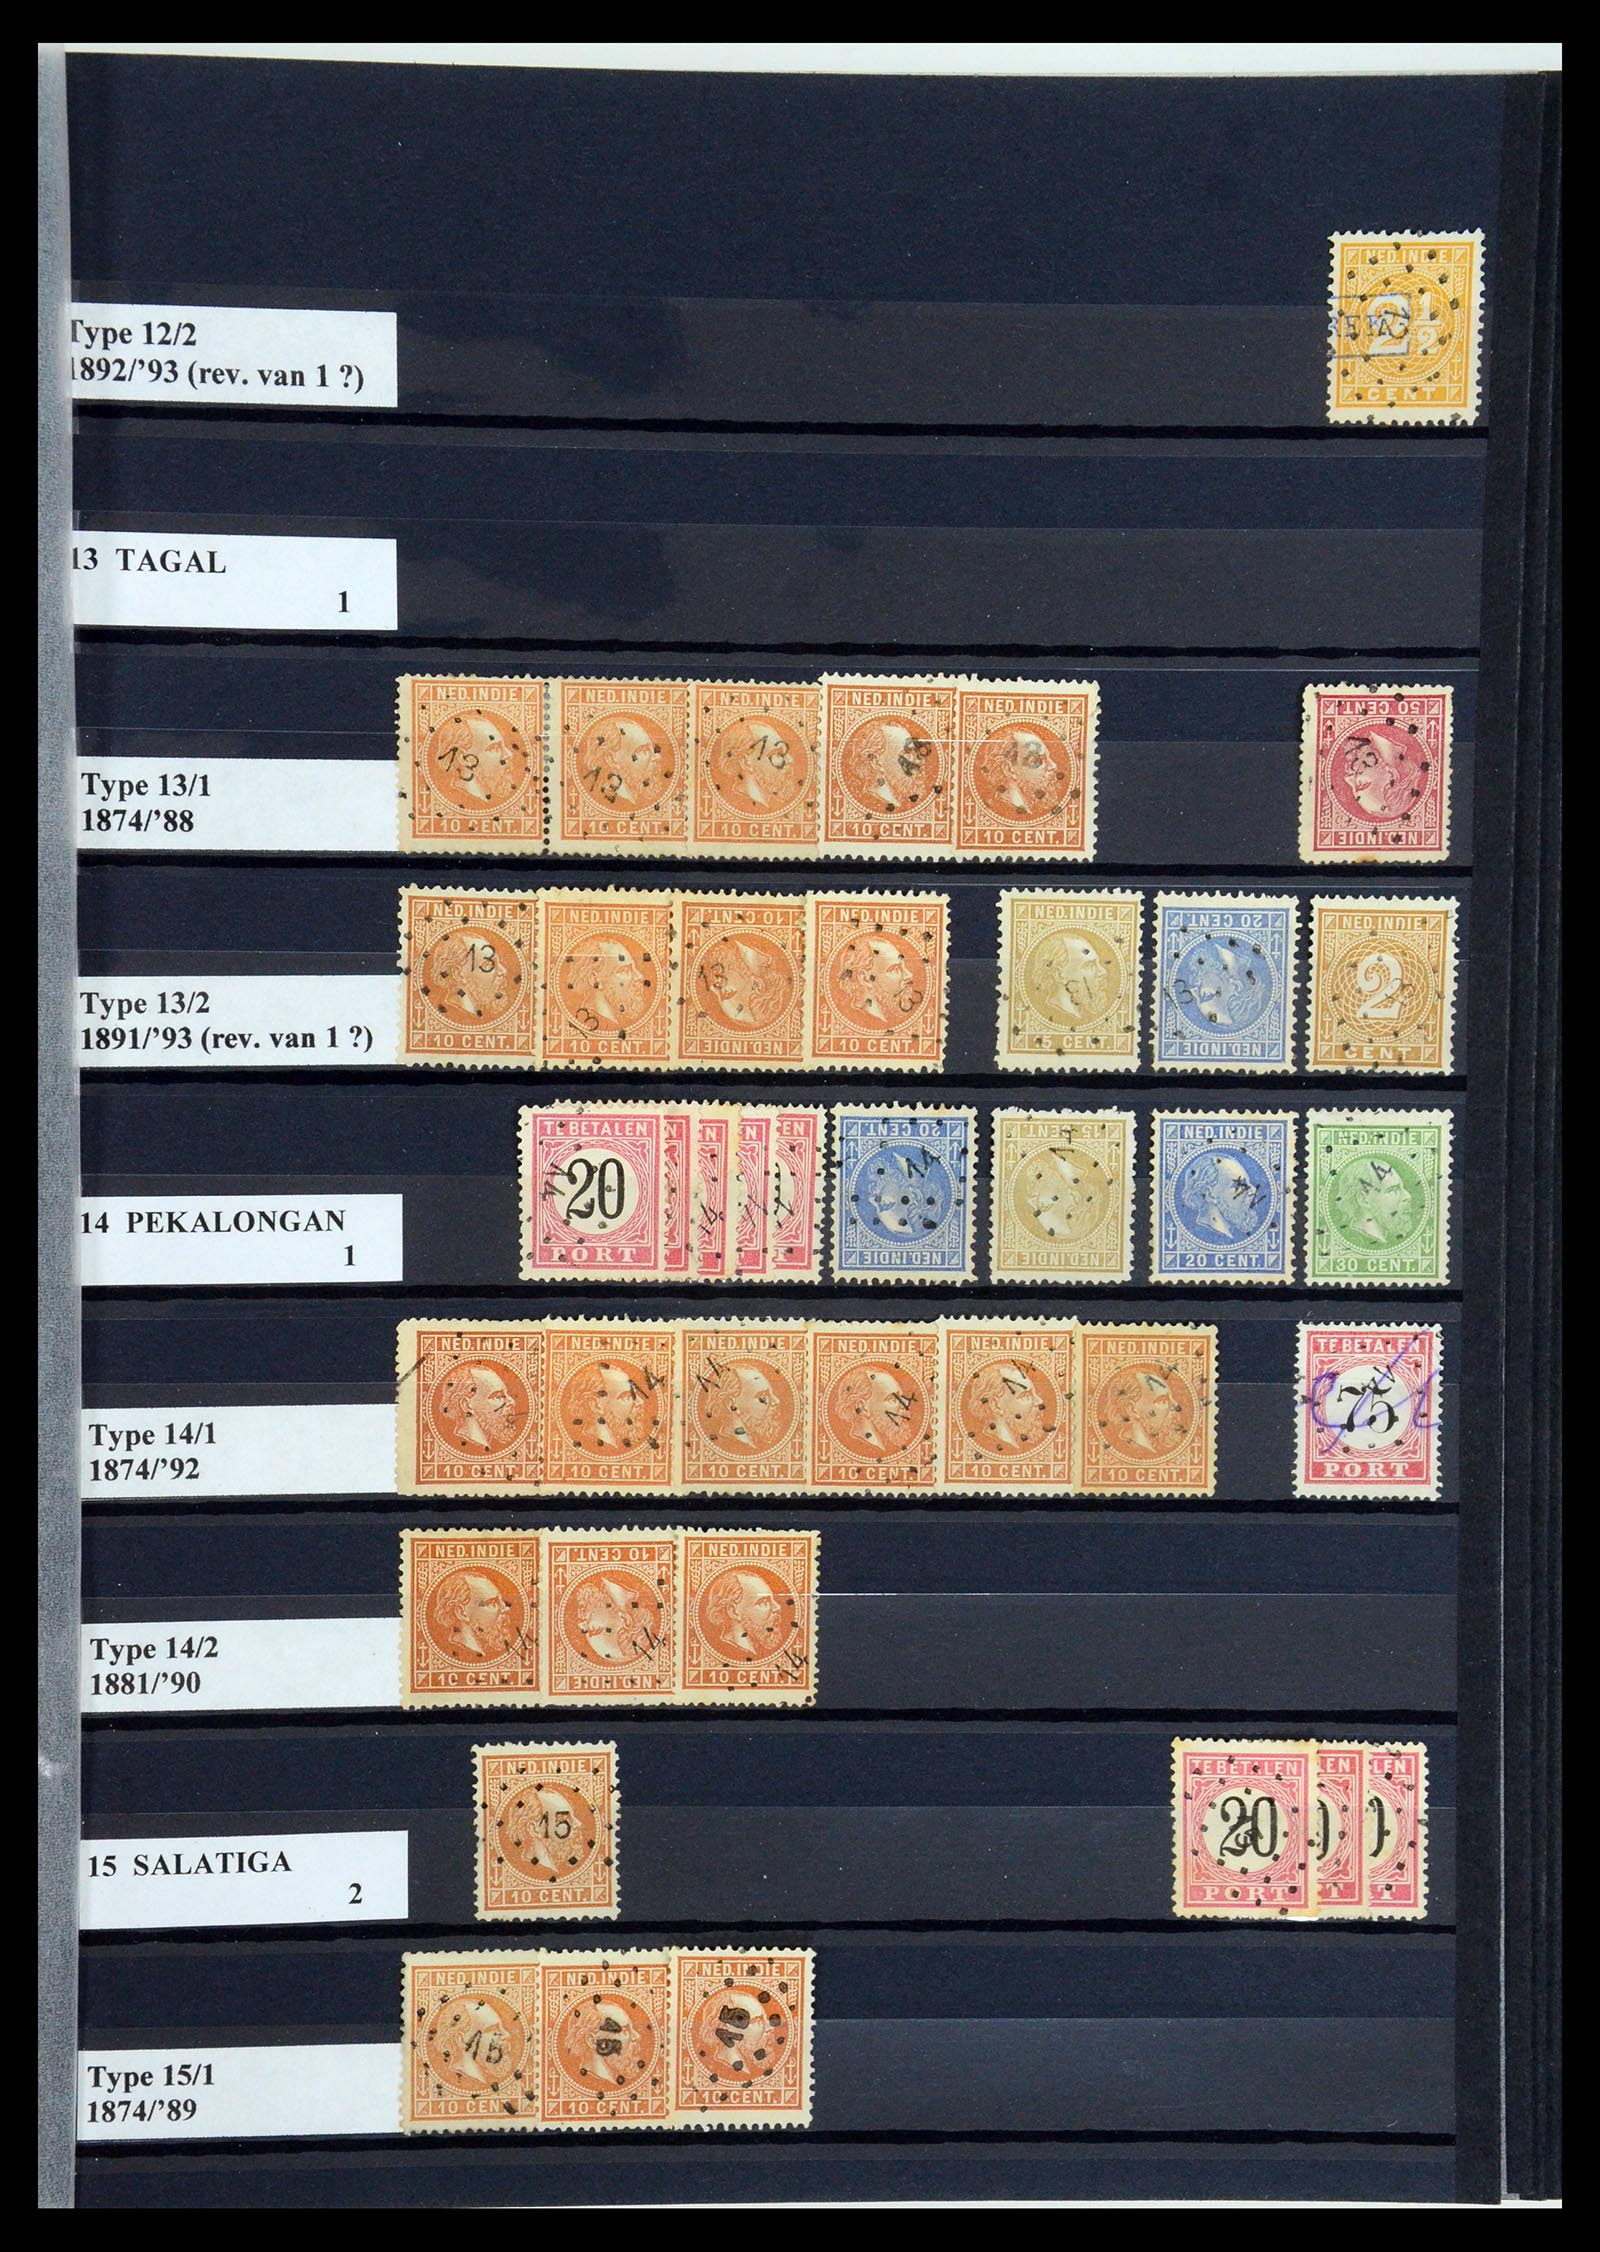 35602 009 - Stamp Collection 35602 Dutch east Indies numeral cancels.